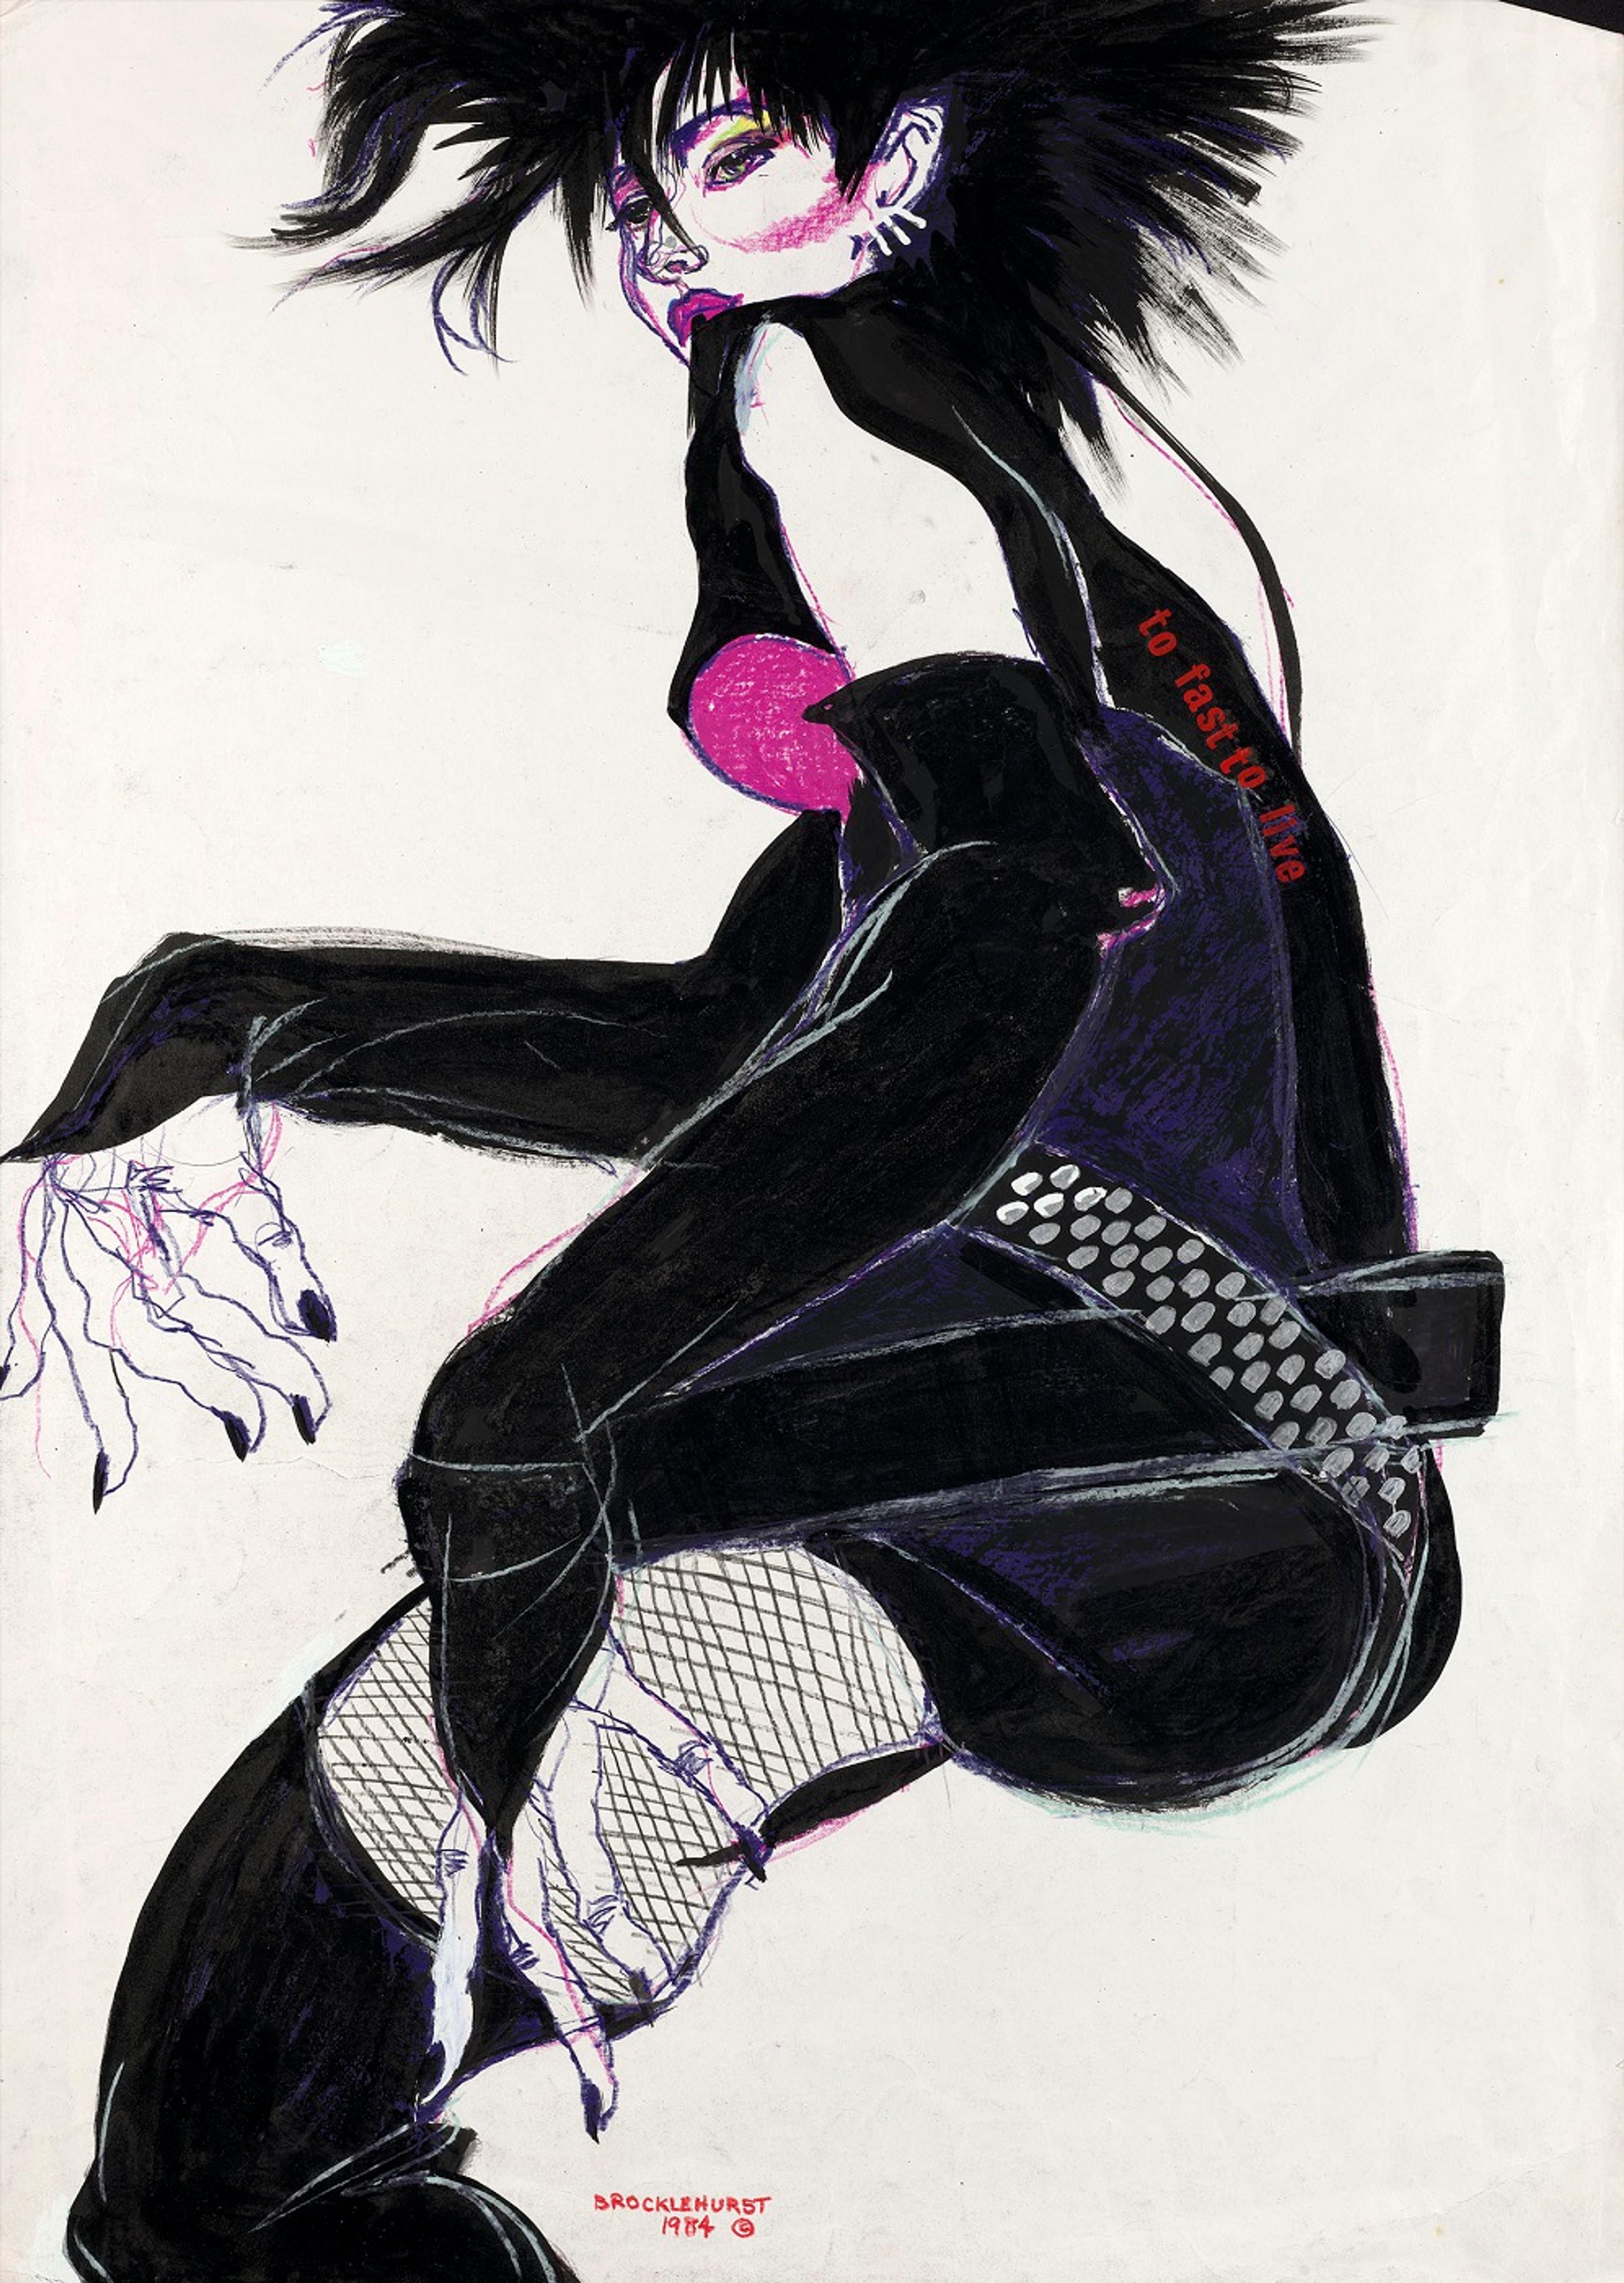 Drawing of a person with long spiky black hair seen from behind, wearing a black body suit, studded belt, black fishnets and black gloves and suspenders